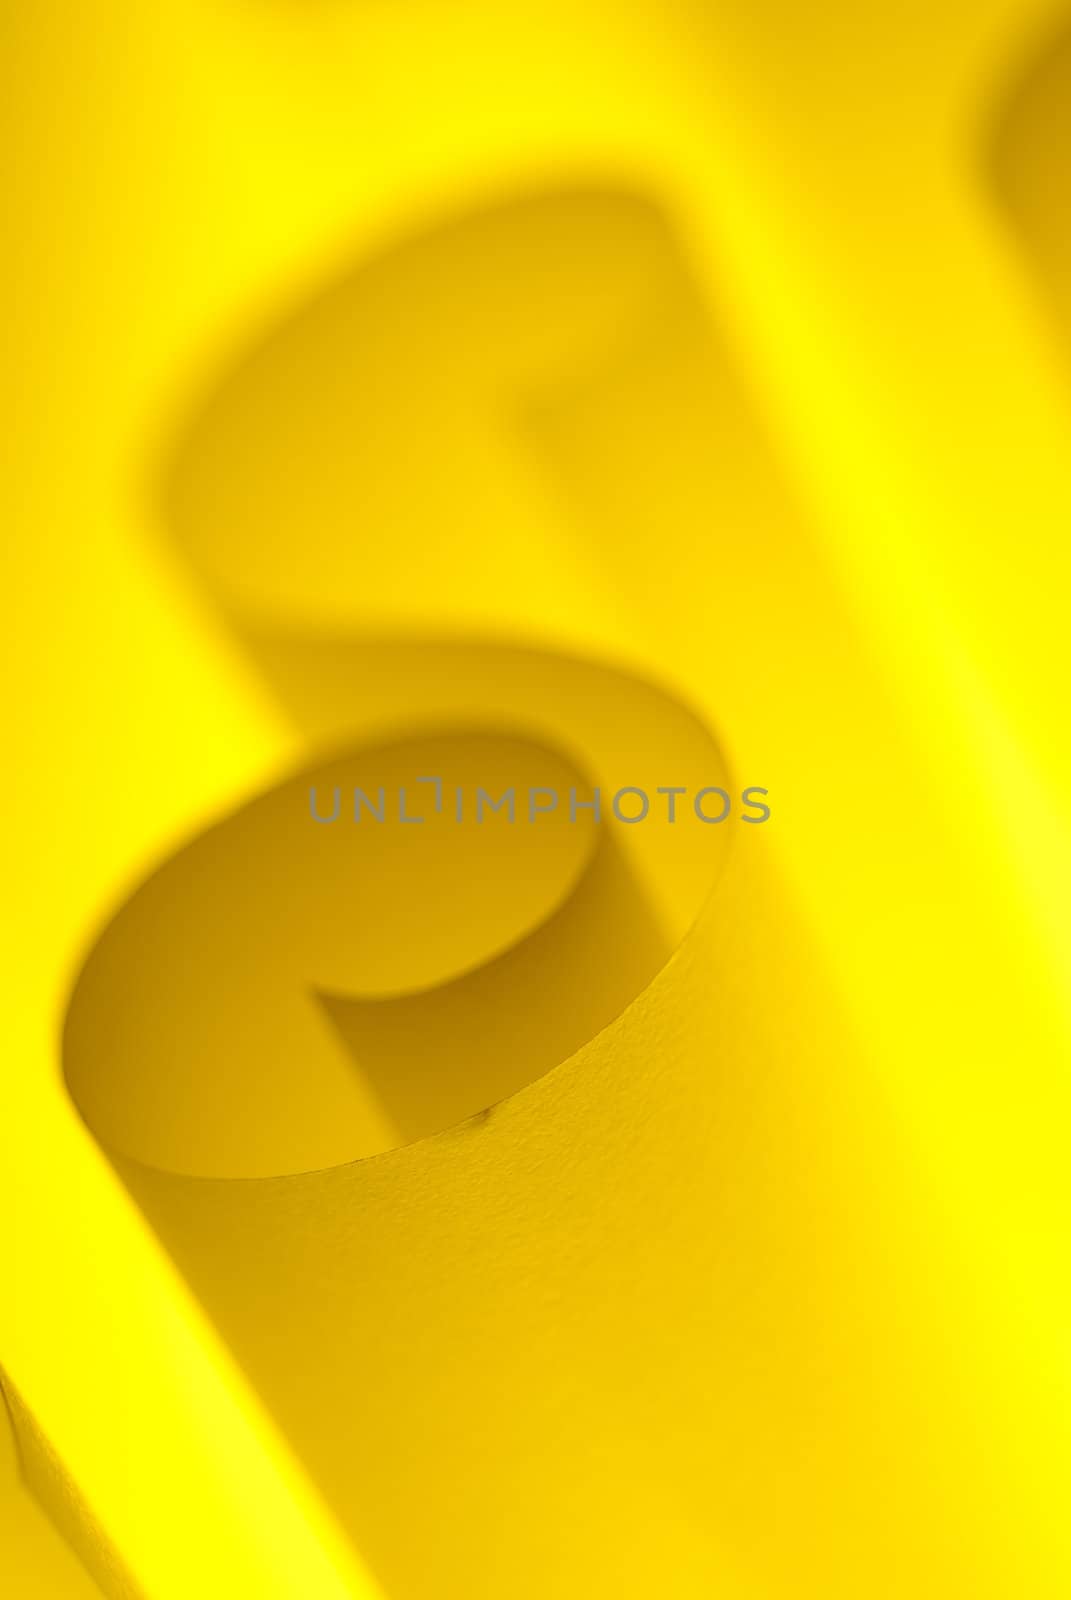 Blank yellow design paper curled up with soft light